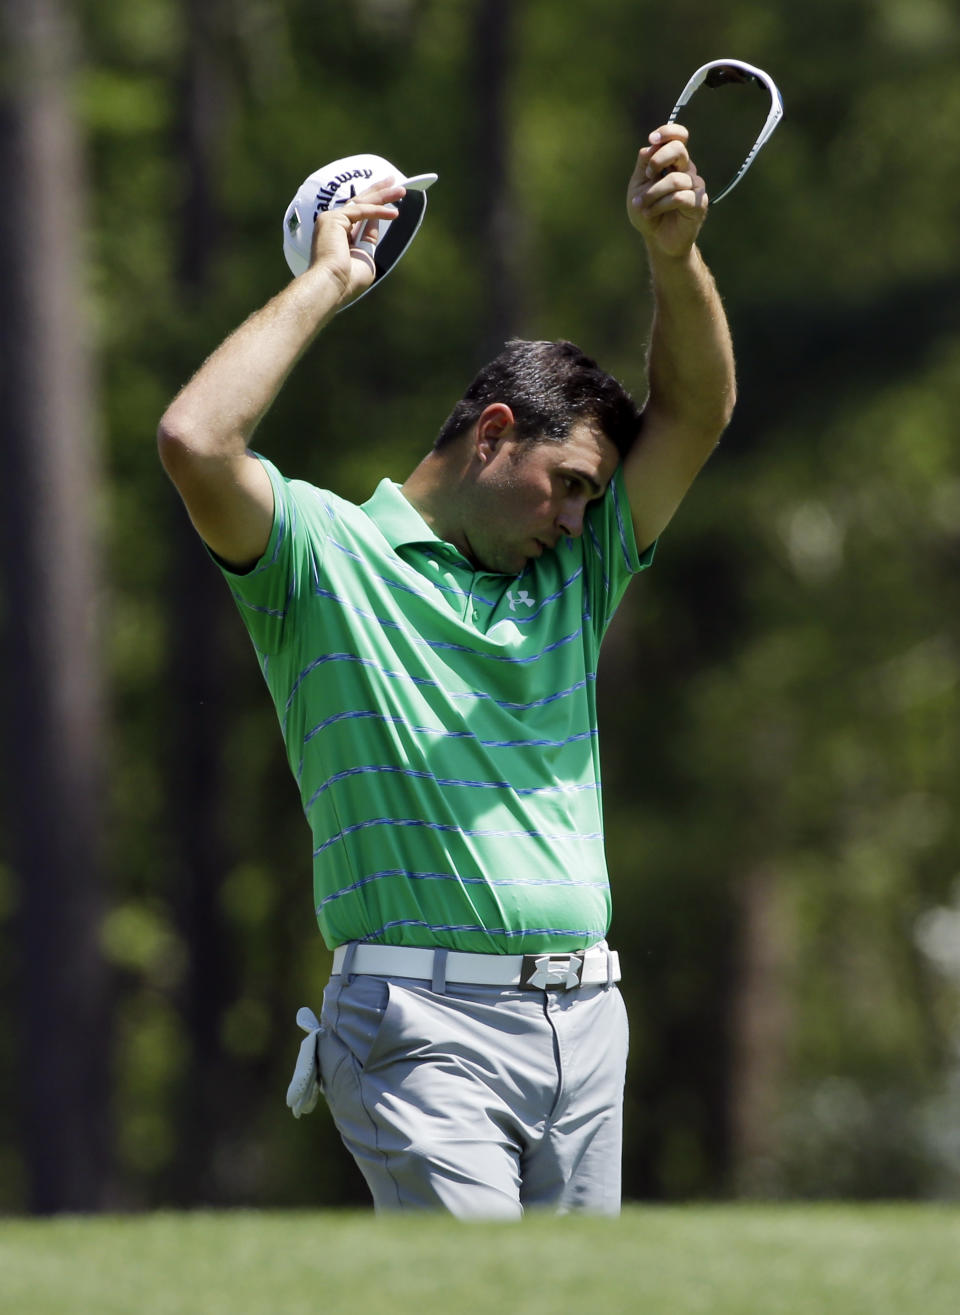 Gary Woodland wipes his brow before teeing off on the12th hole landed in the water during the third round of the Masters golf tournament Saturday, April 12, 2014, in Augusta, Ga. (AP Photo/David J. Phillip)